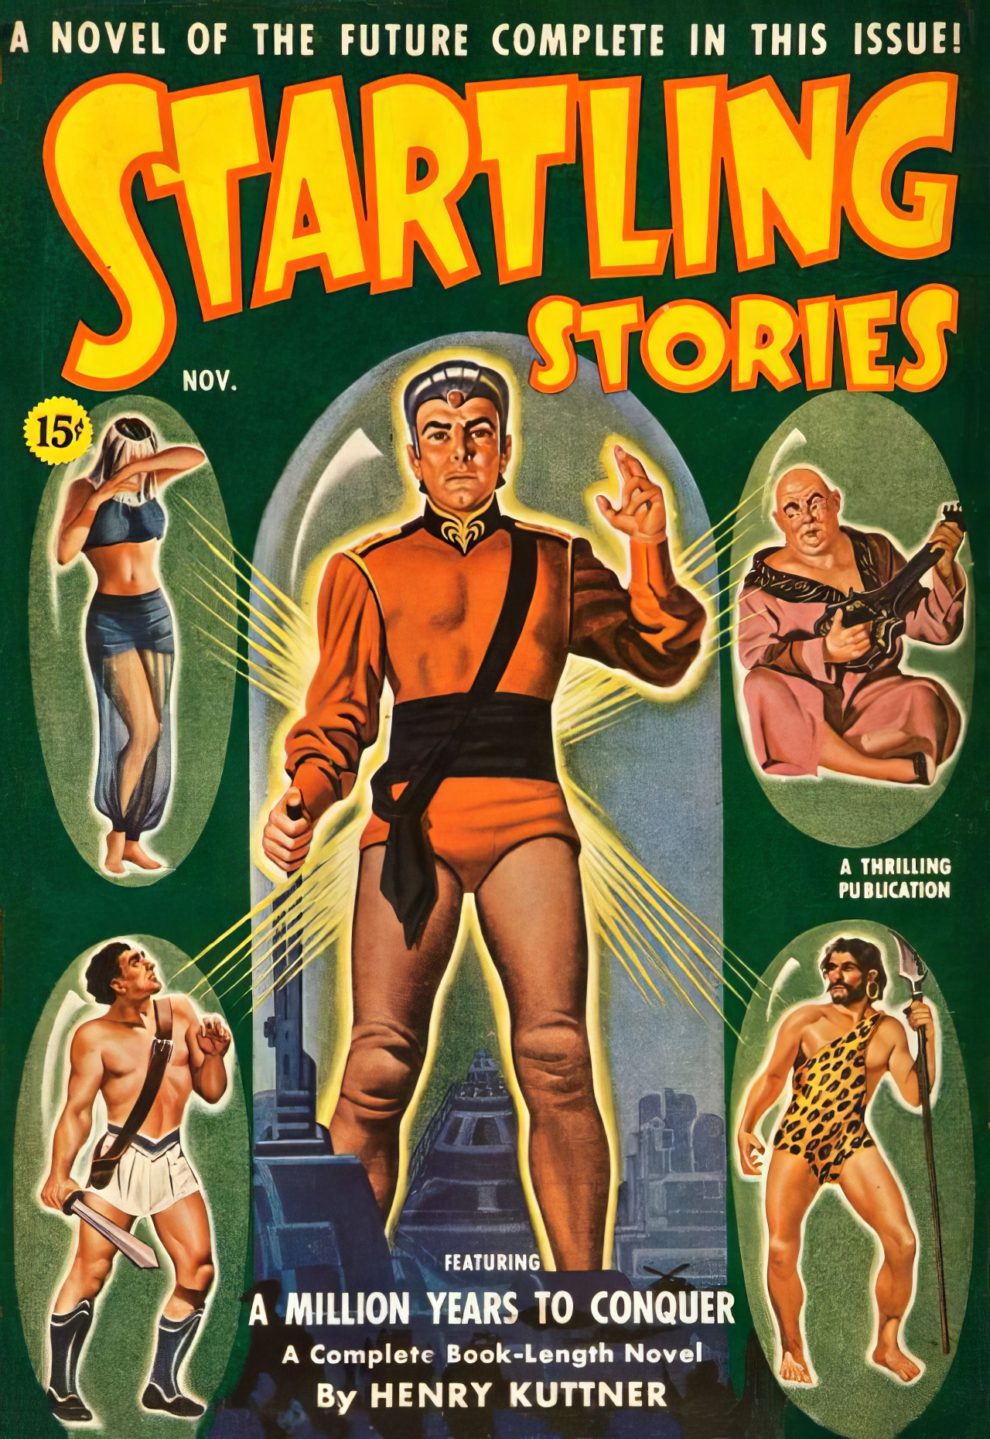 Startling Stories Covers 1940s 5 